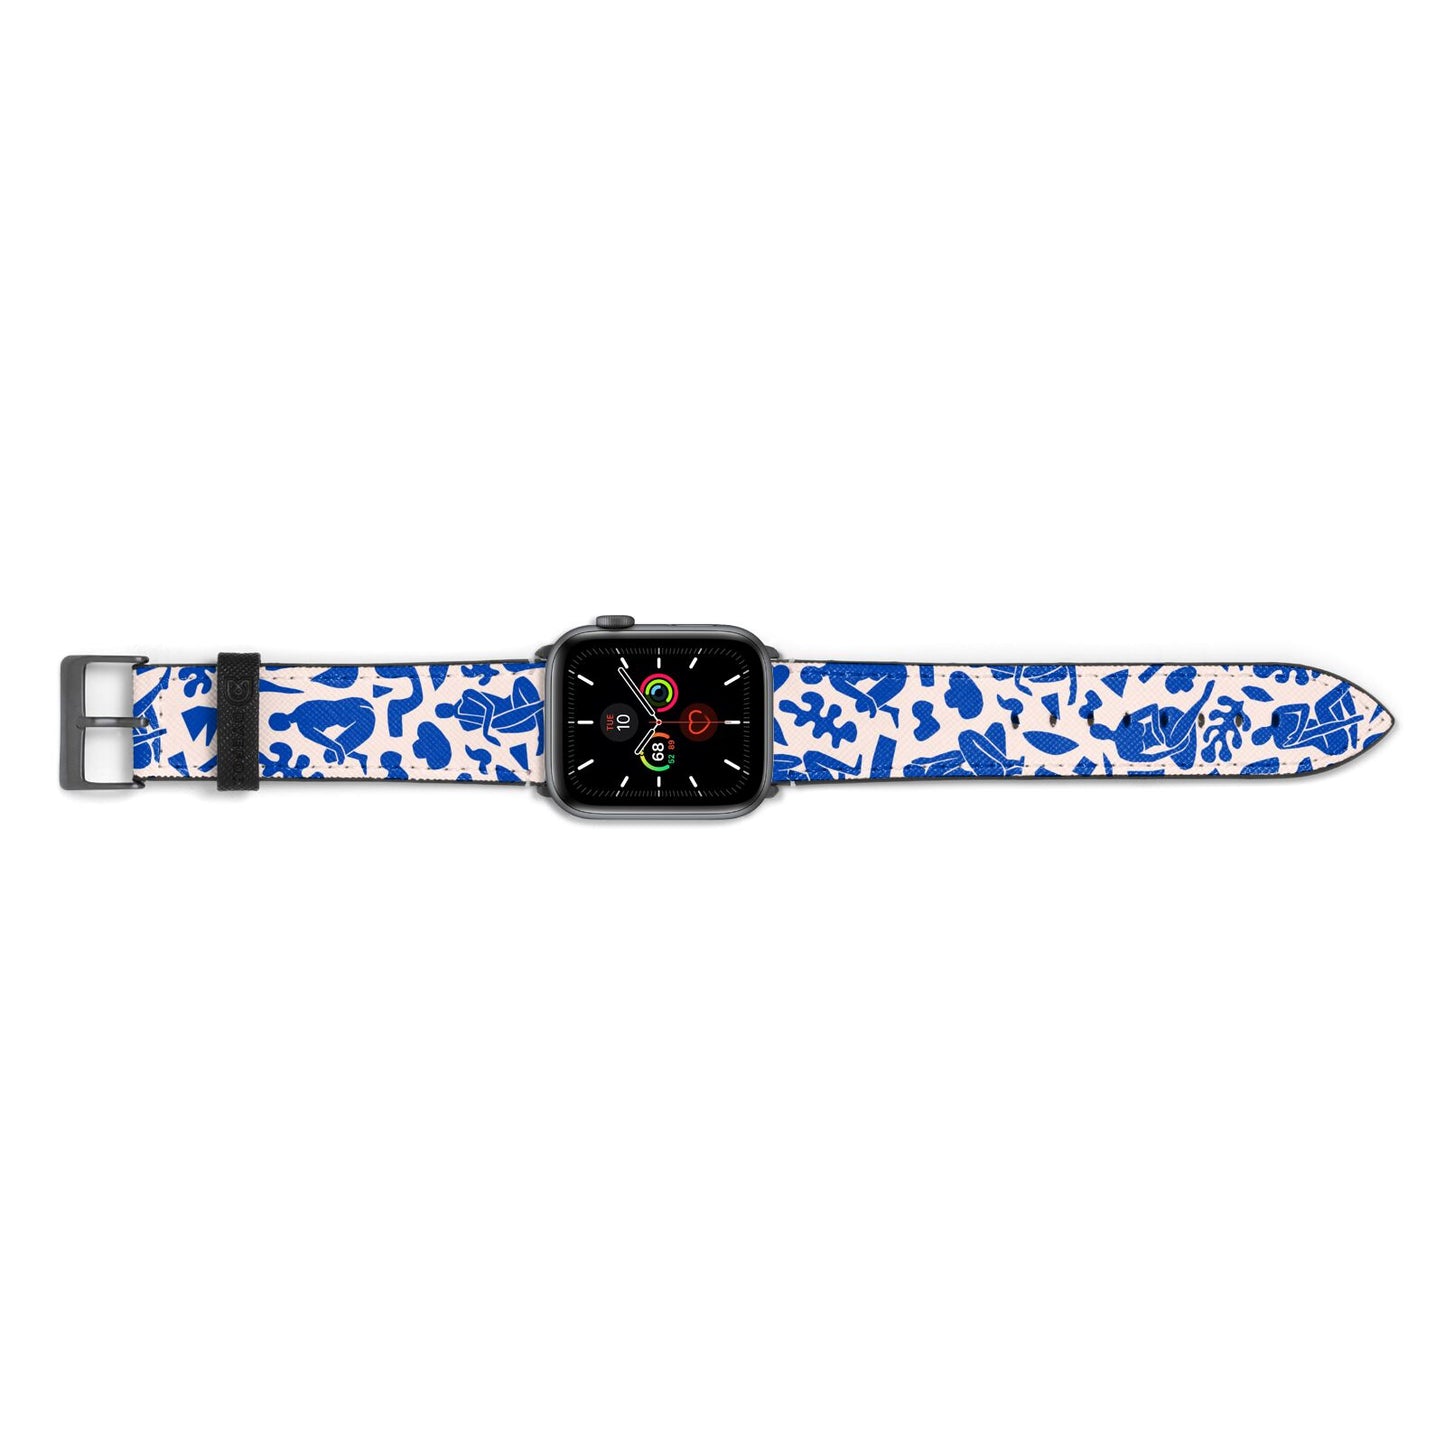 Abstract Art Apple Watch Strap Landscape Image Space Grey Hardware